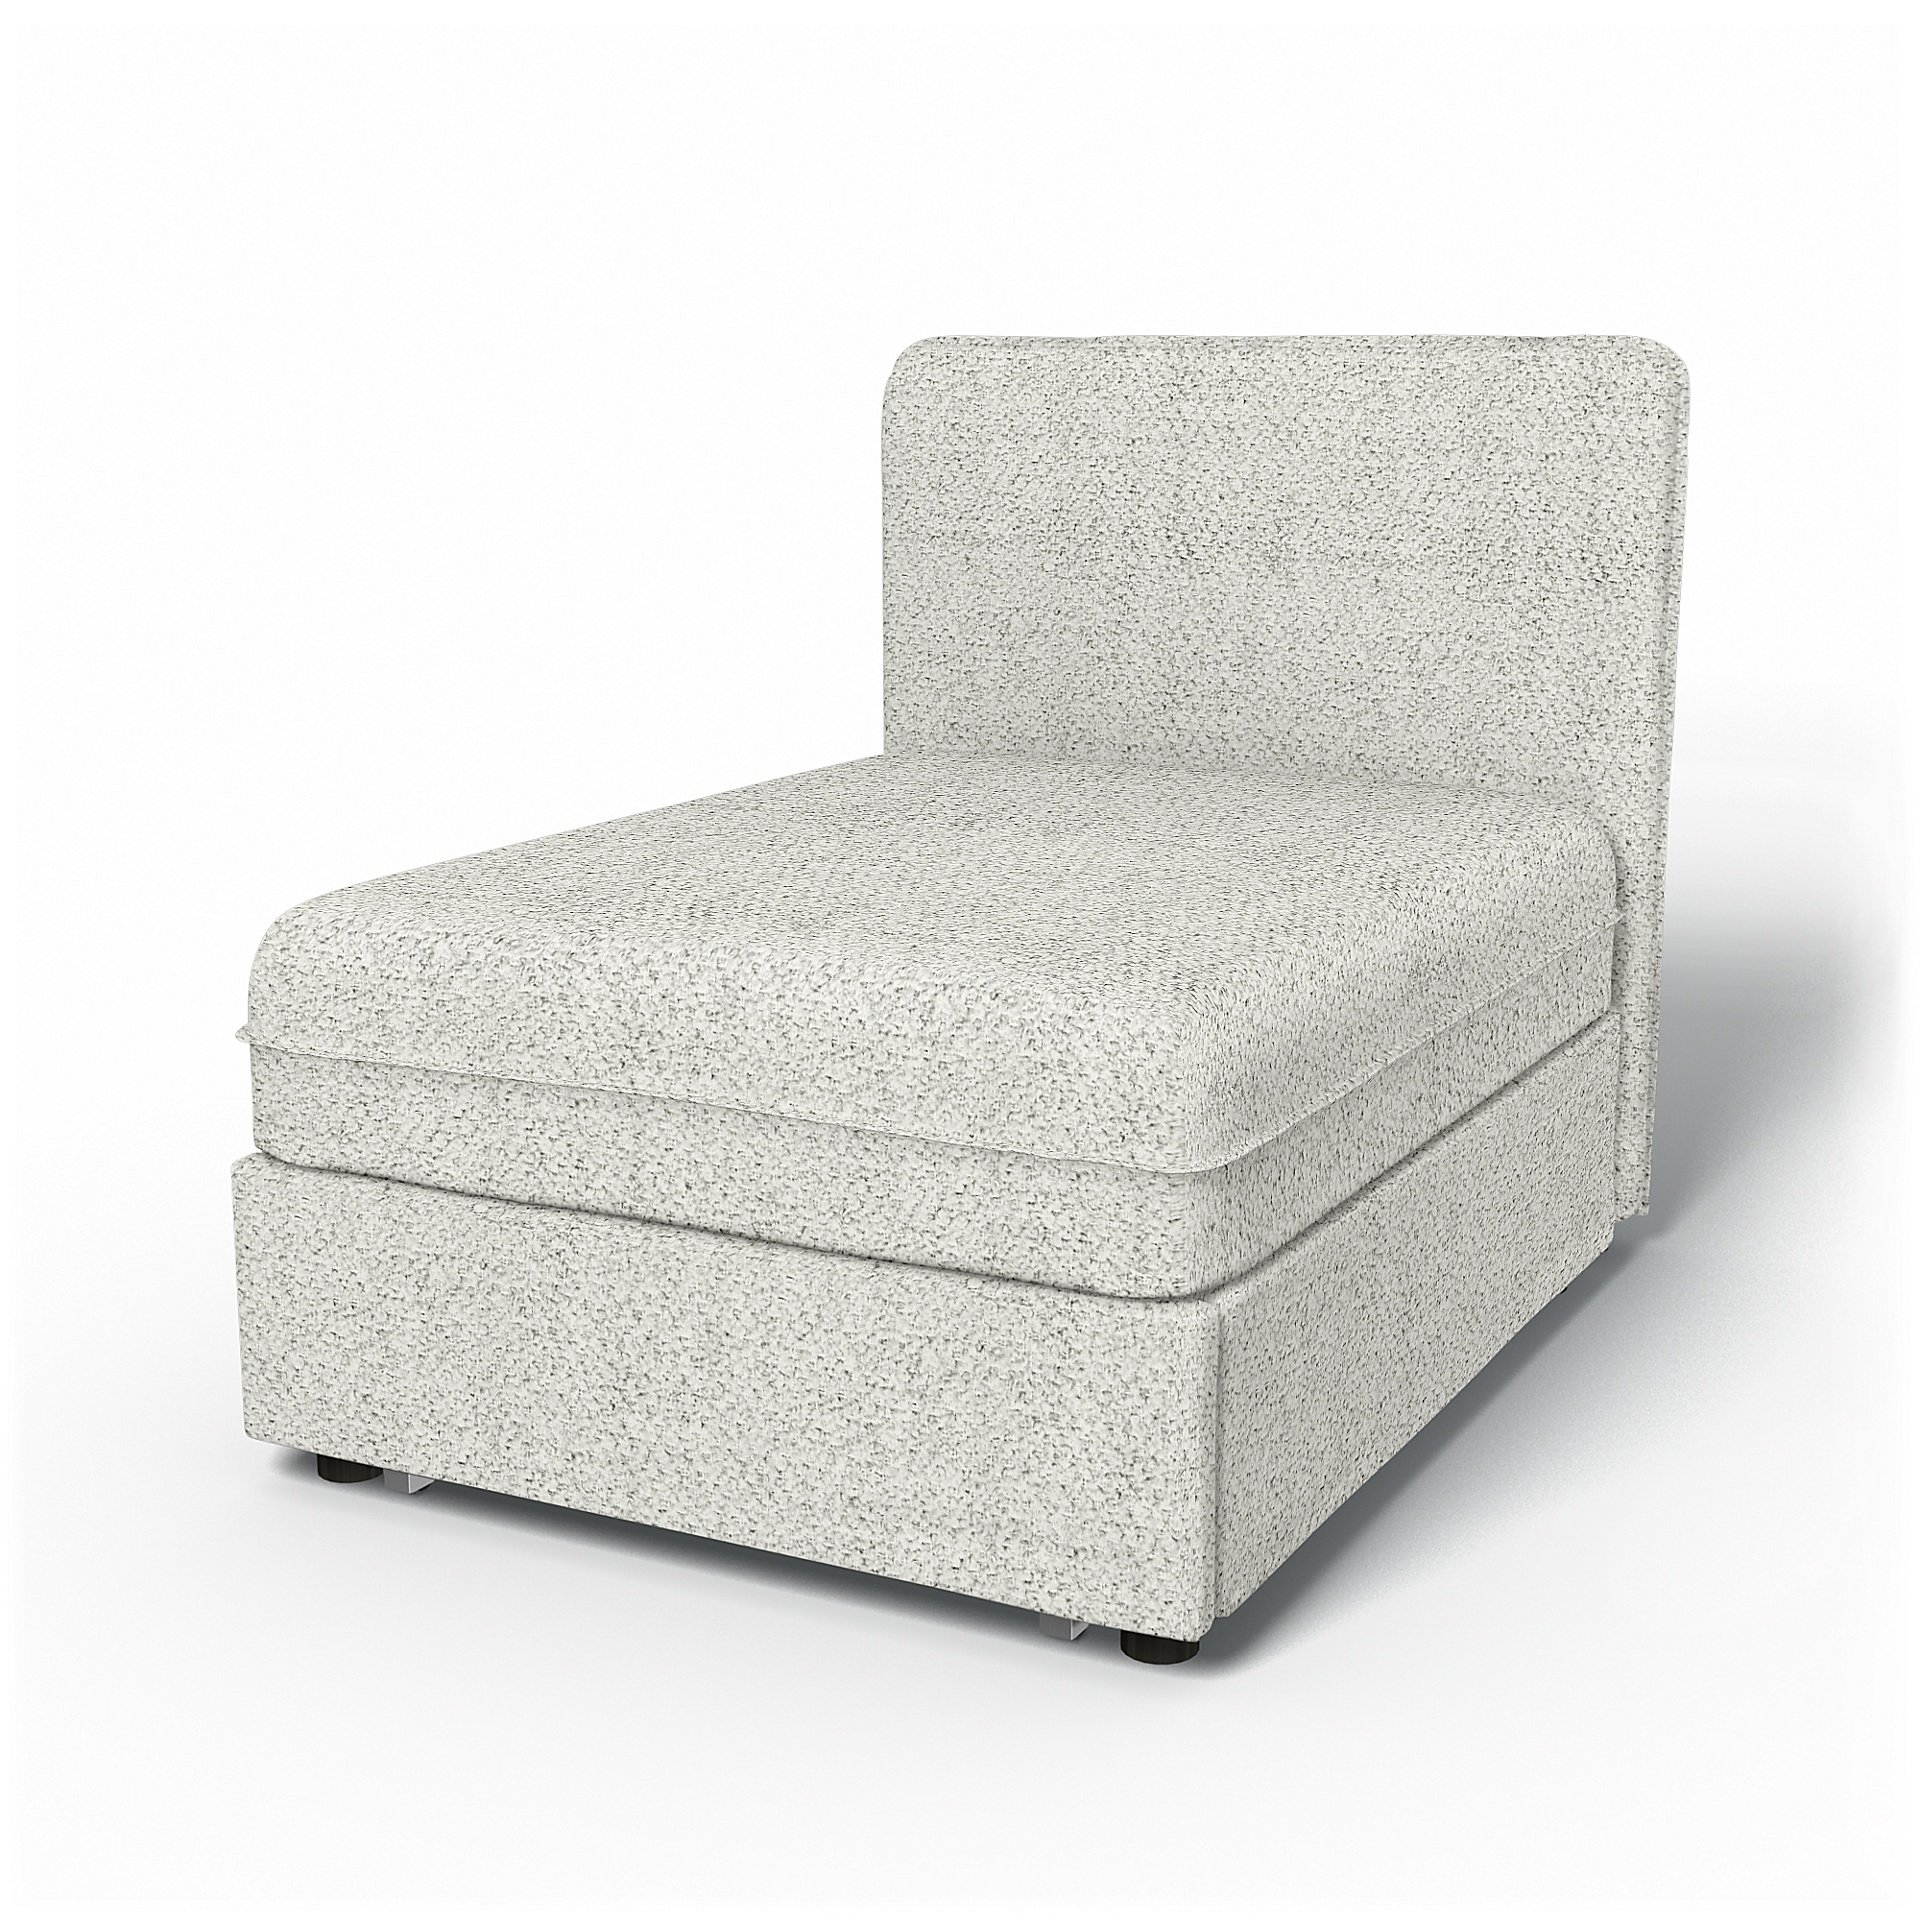 IKEA - Vallentuna Seat Module with Low Back Sofa Bed Cover 80x100 cm 32x39in, Ivory, Boucle & Textur